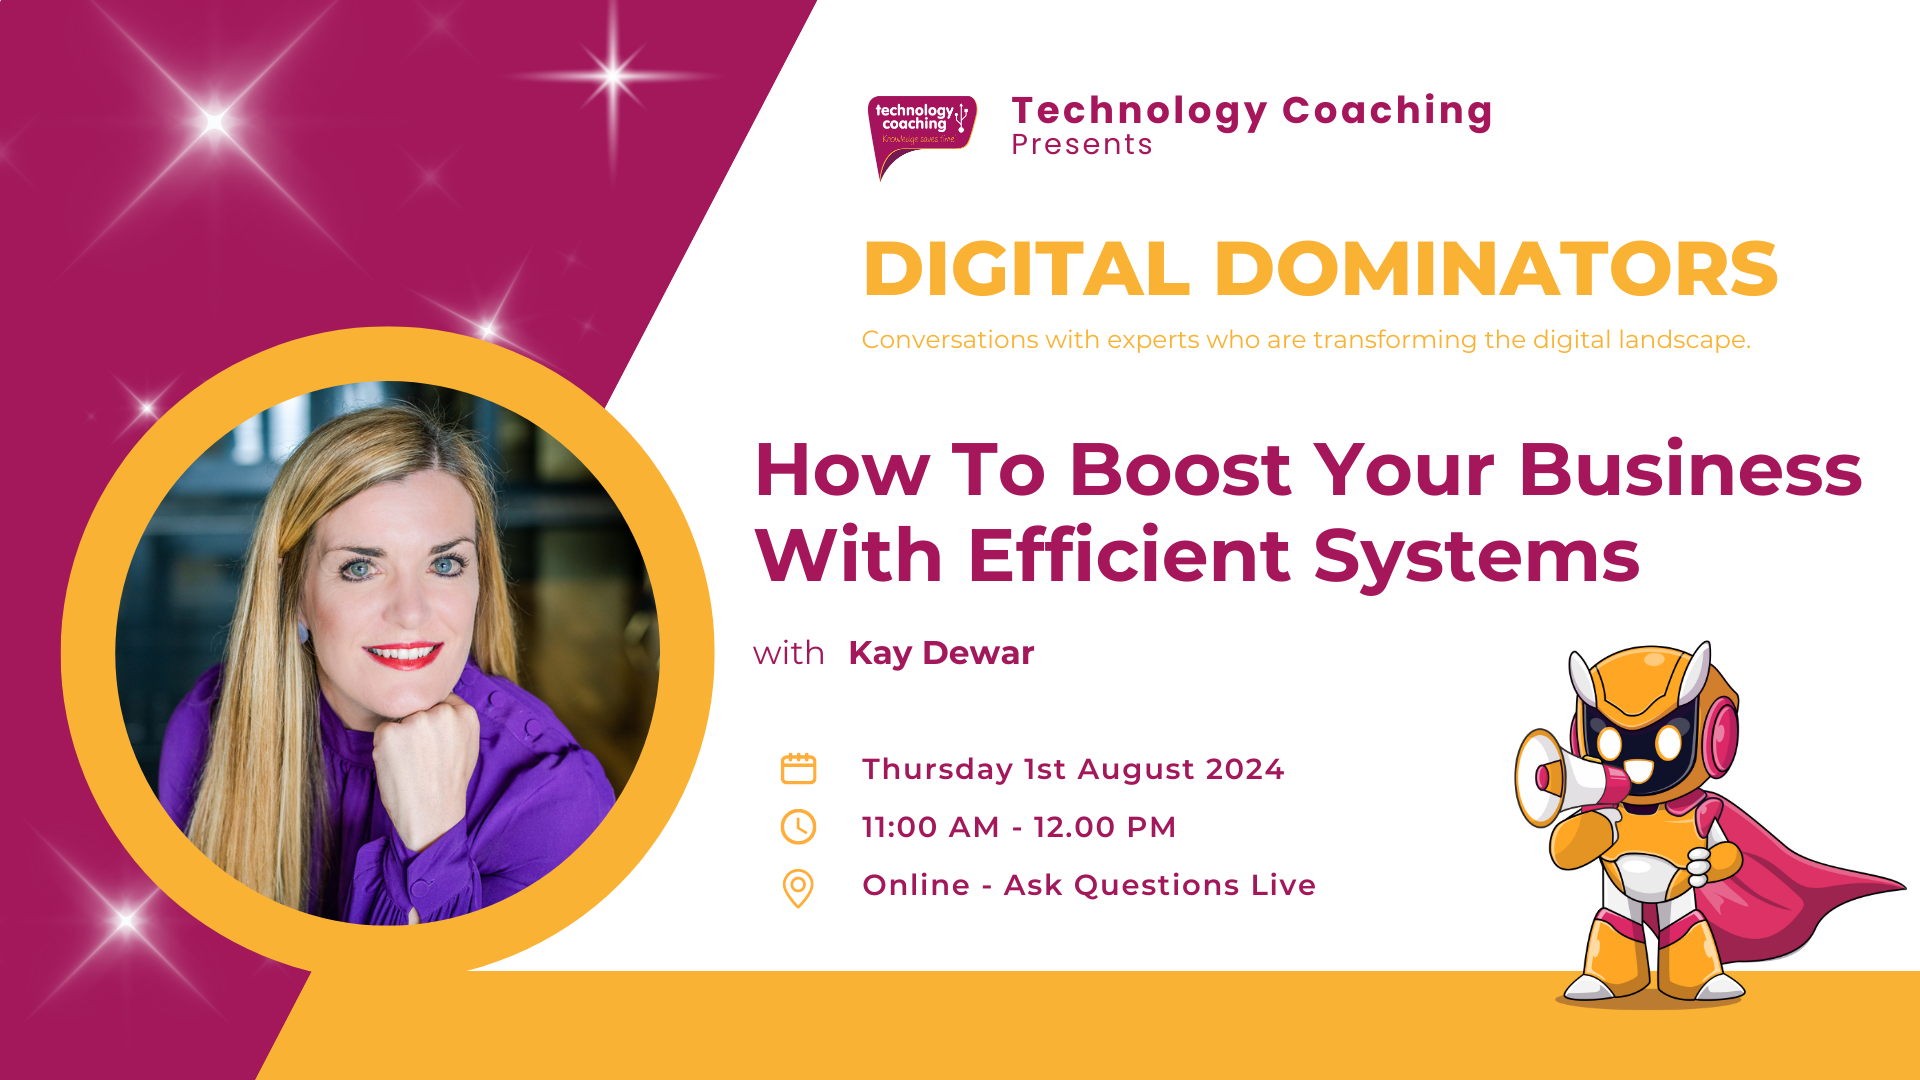 Technology Coaching Digital Dominators How To Boost Your Business With Efficient Systems